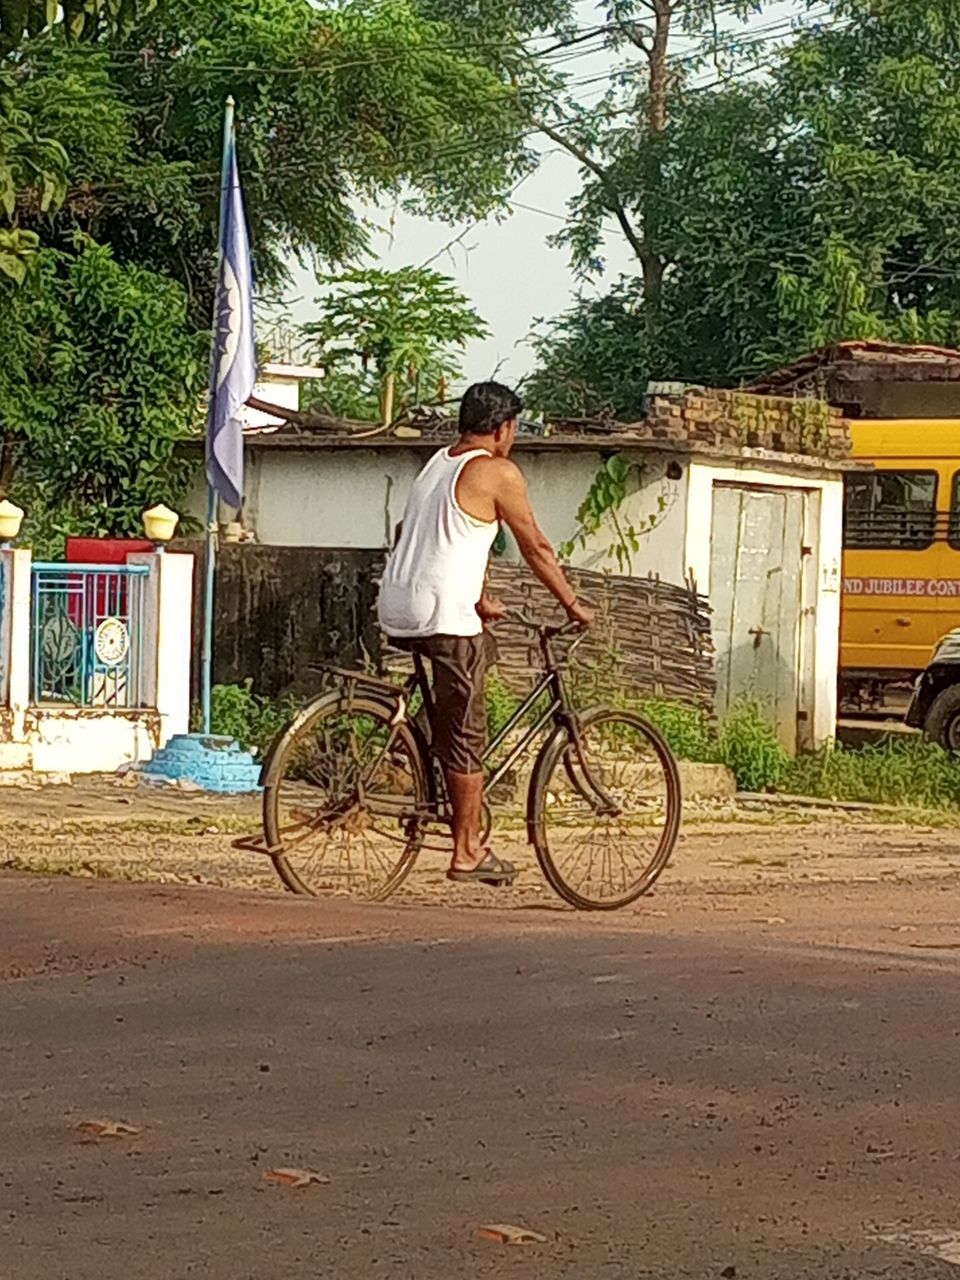 transportation, bicycle, mode of transportation, one person, land vehicle, tree, full length, plant, vehicle, adult, men, lifestyles, nature, city, casual clothing, sports equipment, day, road, architecture, leisure activity, street, cycling, sports, outdoors, young adult, motion, riding, travel, built structure, rear view, activity, cycle sport, person, rickshaw, bicycle wheel, building exterior